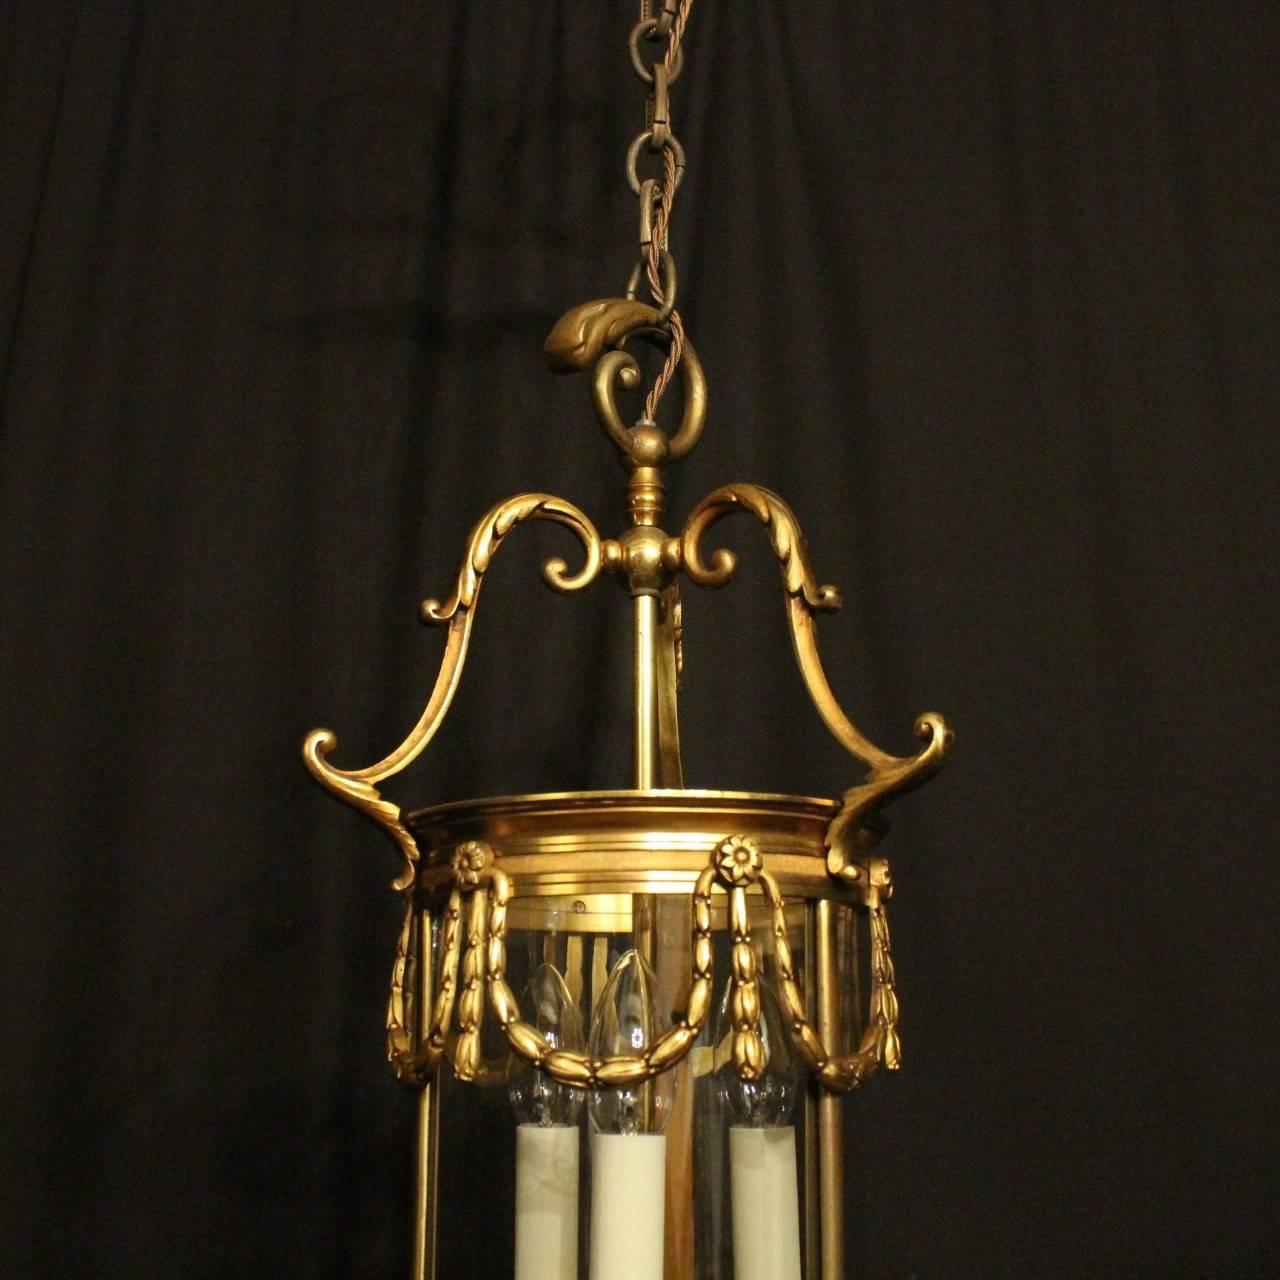 A French gilded bronze triple light convex antique hall lantern, the three light fittings surrounded by three sectional convex glass panels and held within an ornate acanthus leaf scrolling framework with reeded banding, swaged laurel leaf